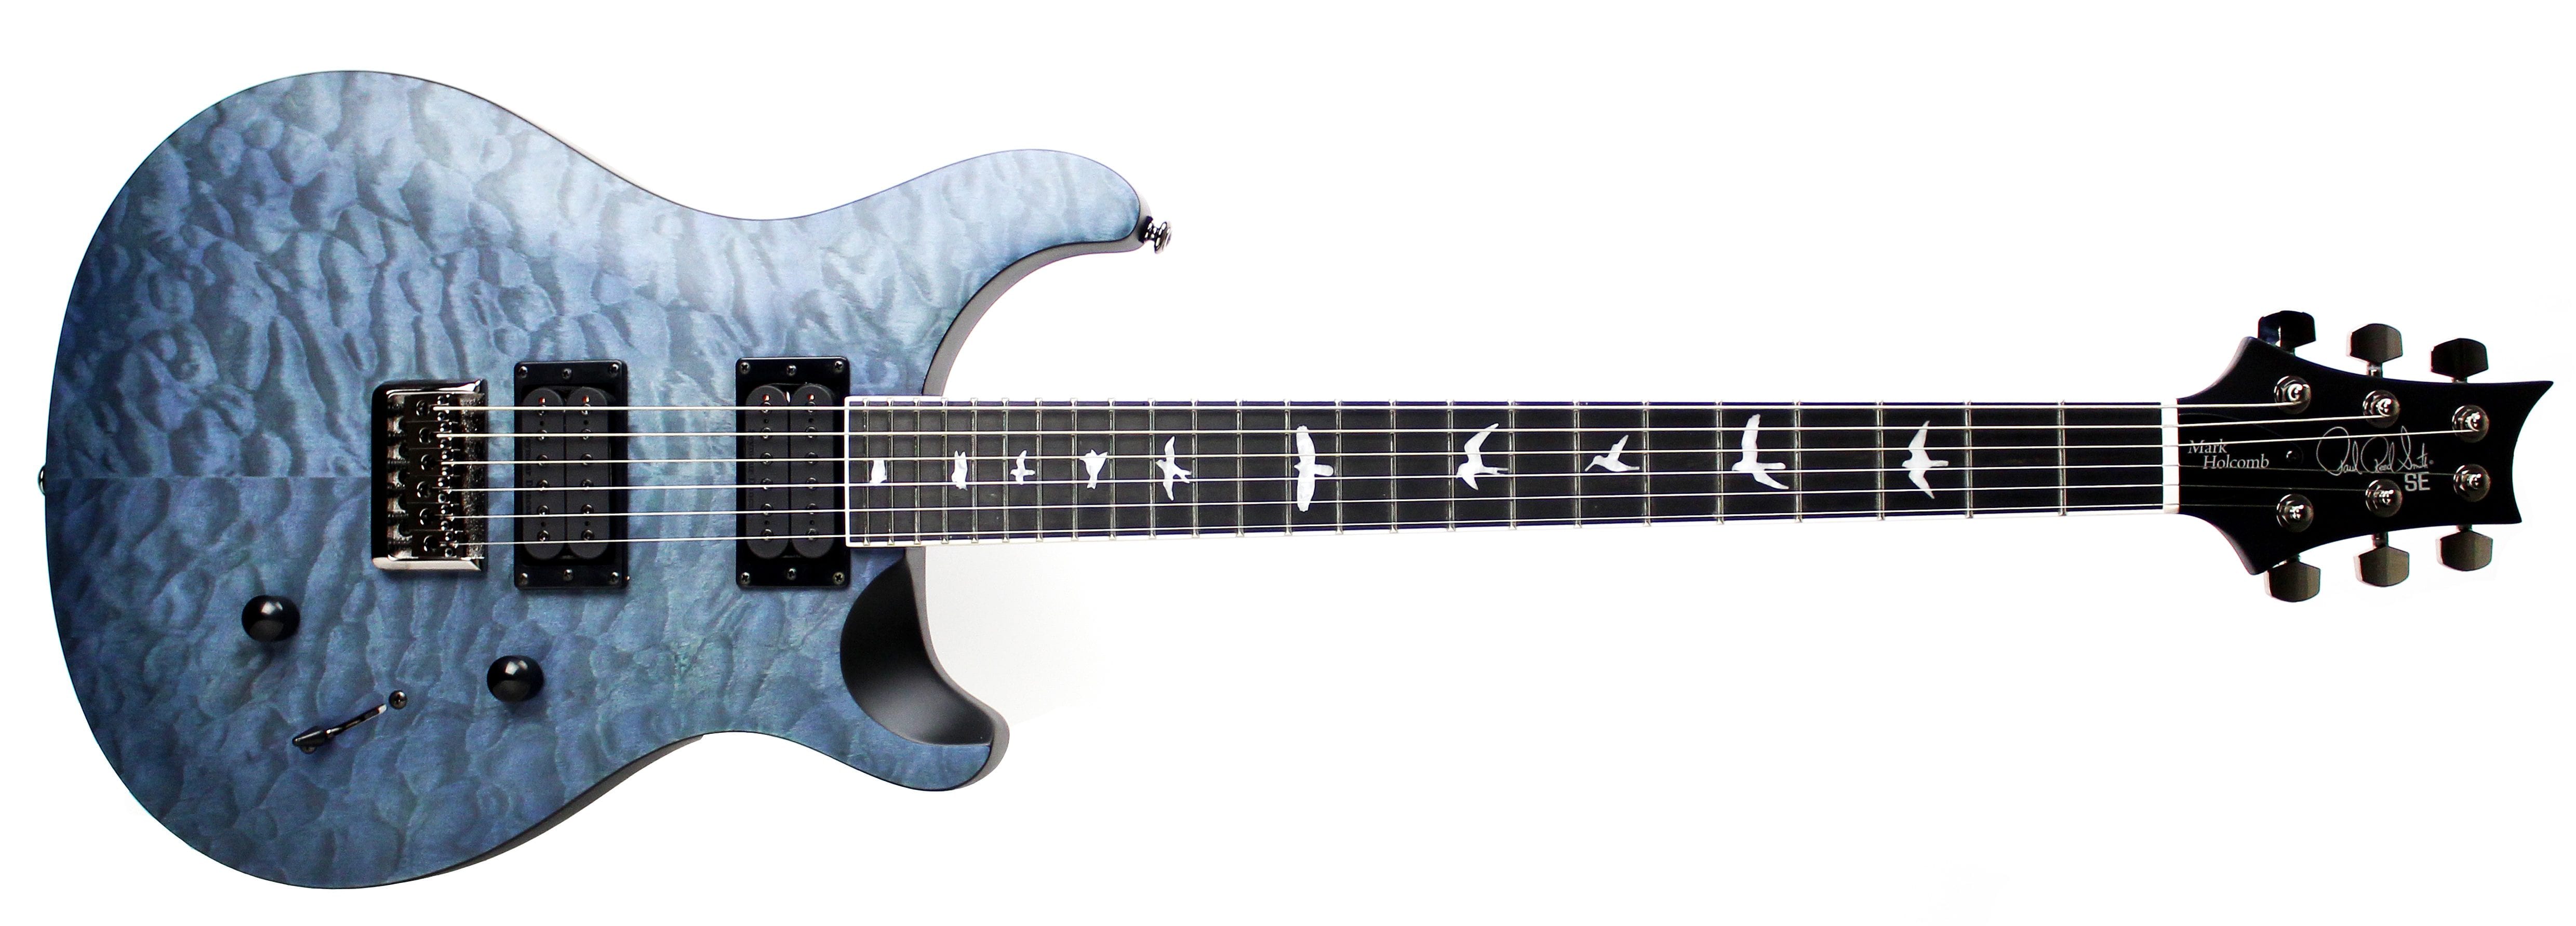 PRS Europe announce LTD Edition SE Mark Holcomb in Whale Blue Satin